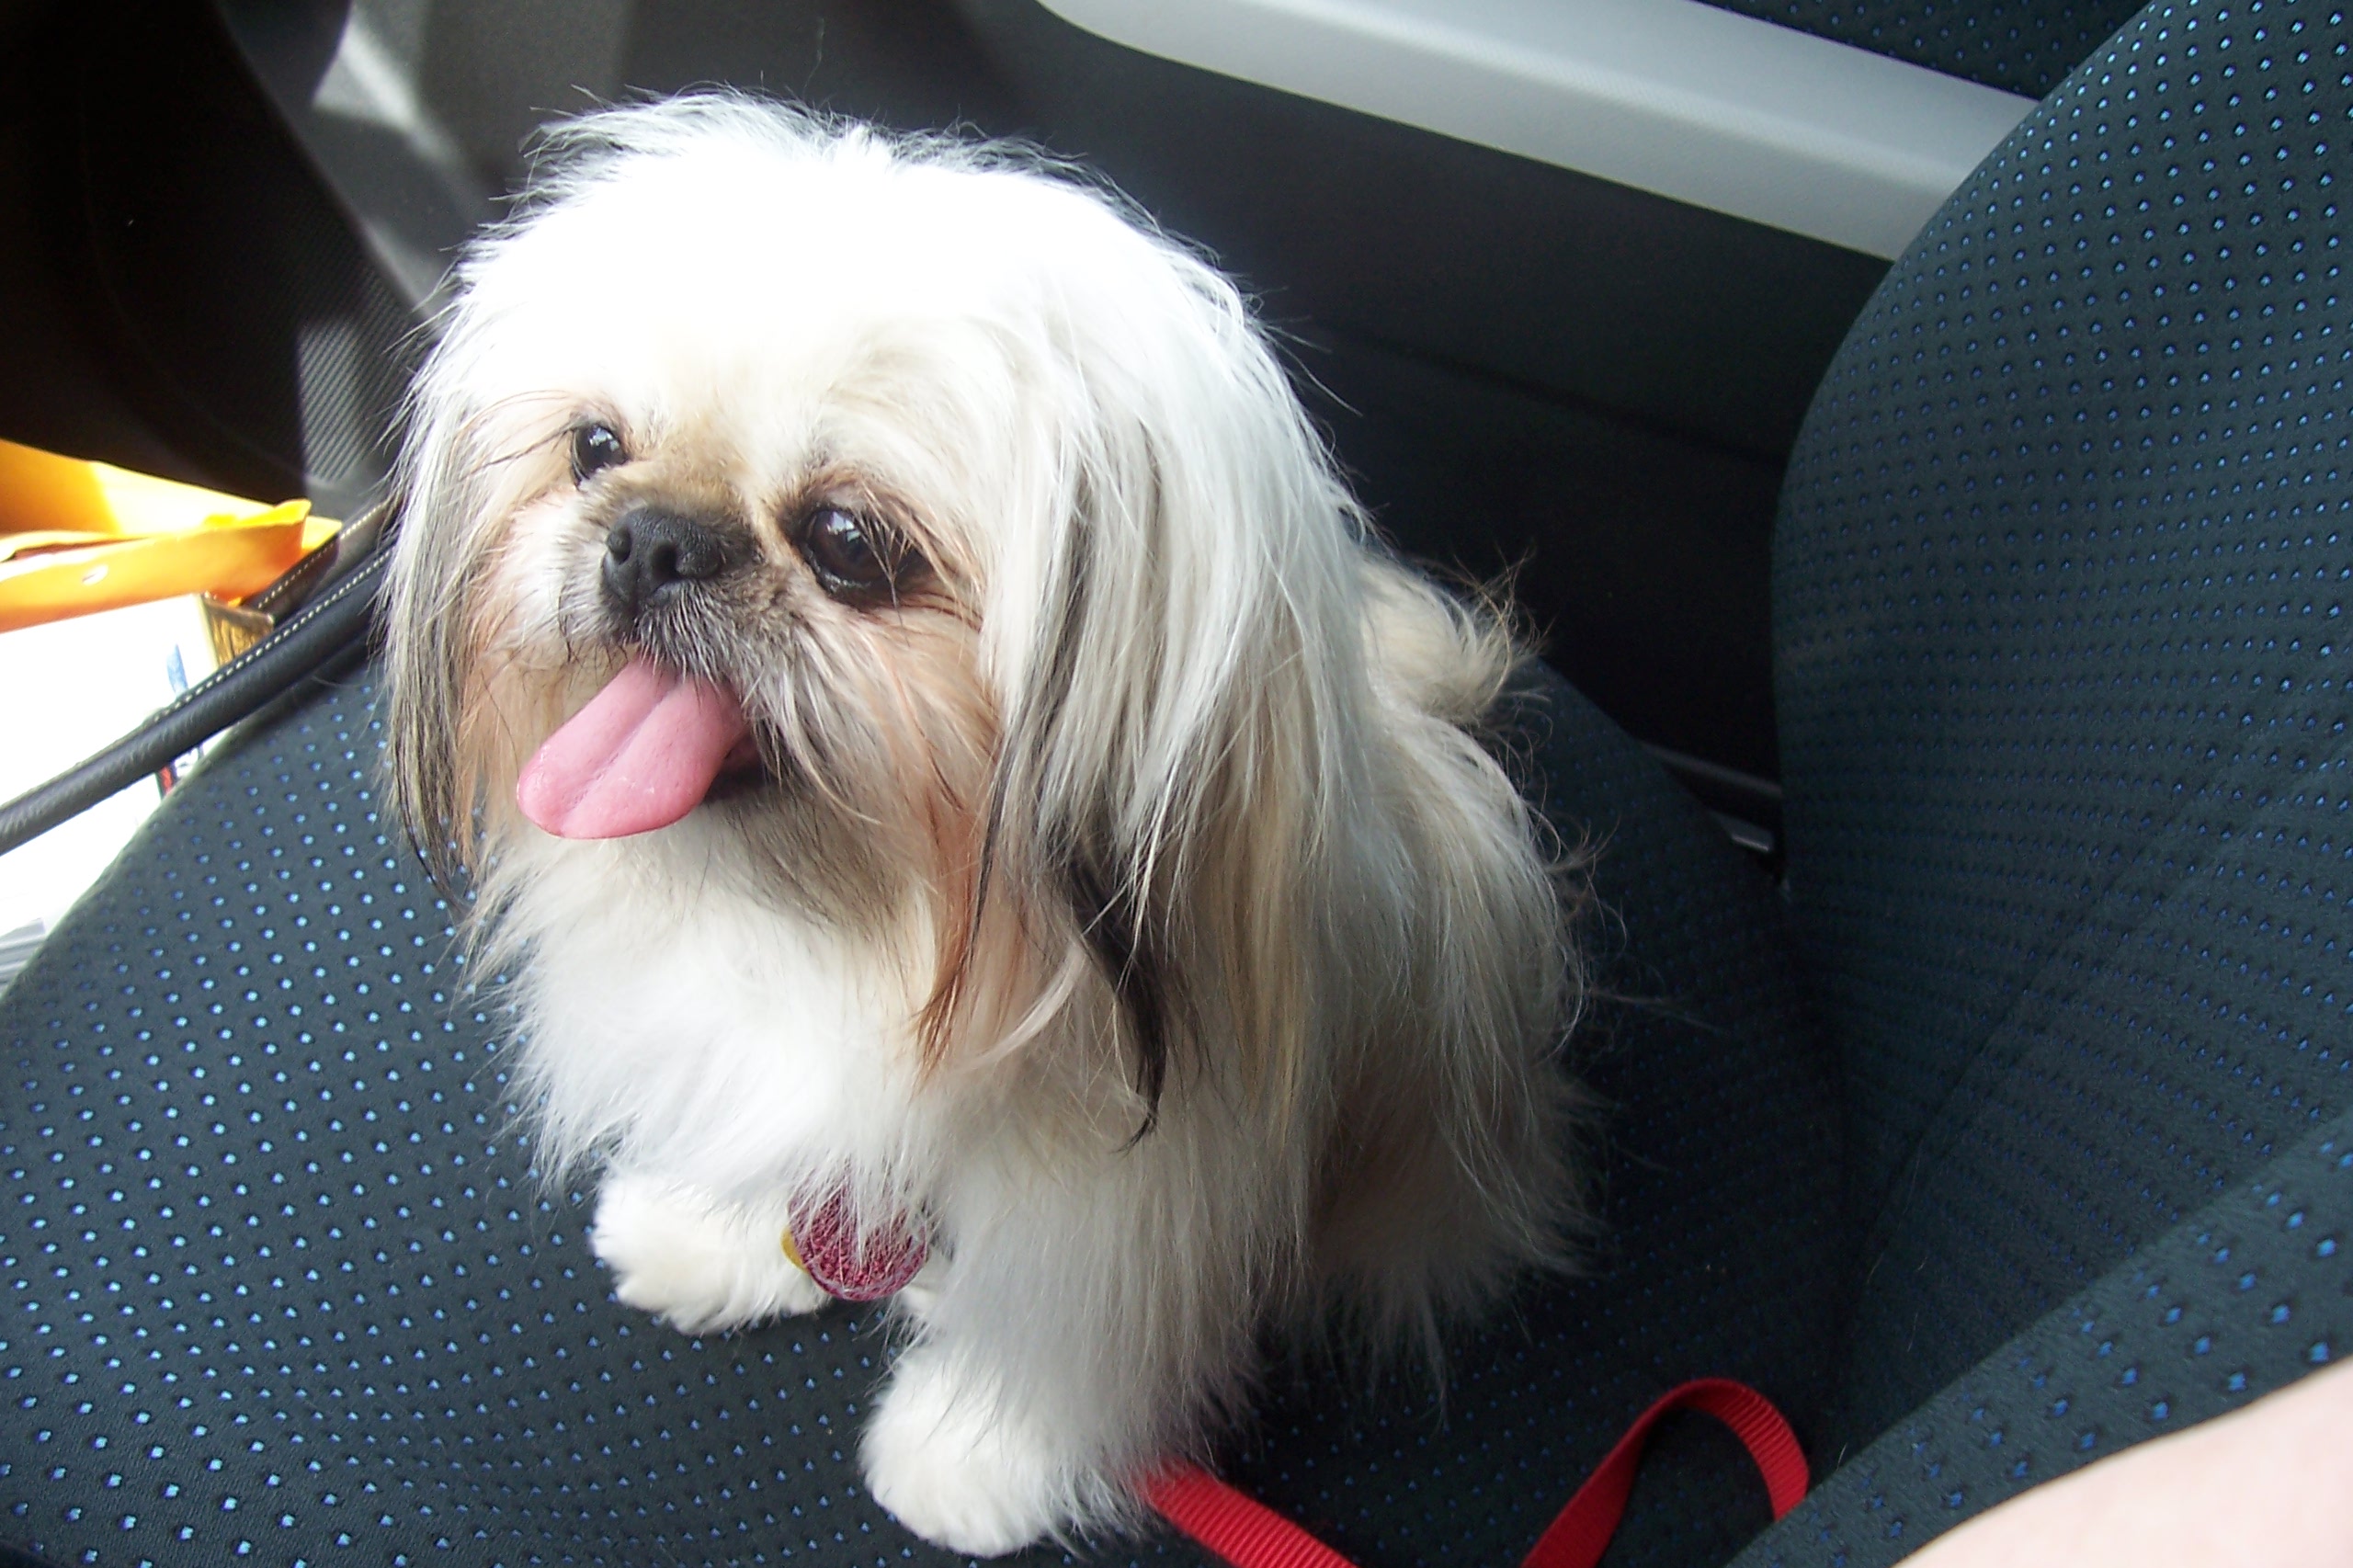 Peke-A-Tzu sitting on the chair while panting with its tongue out